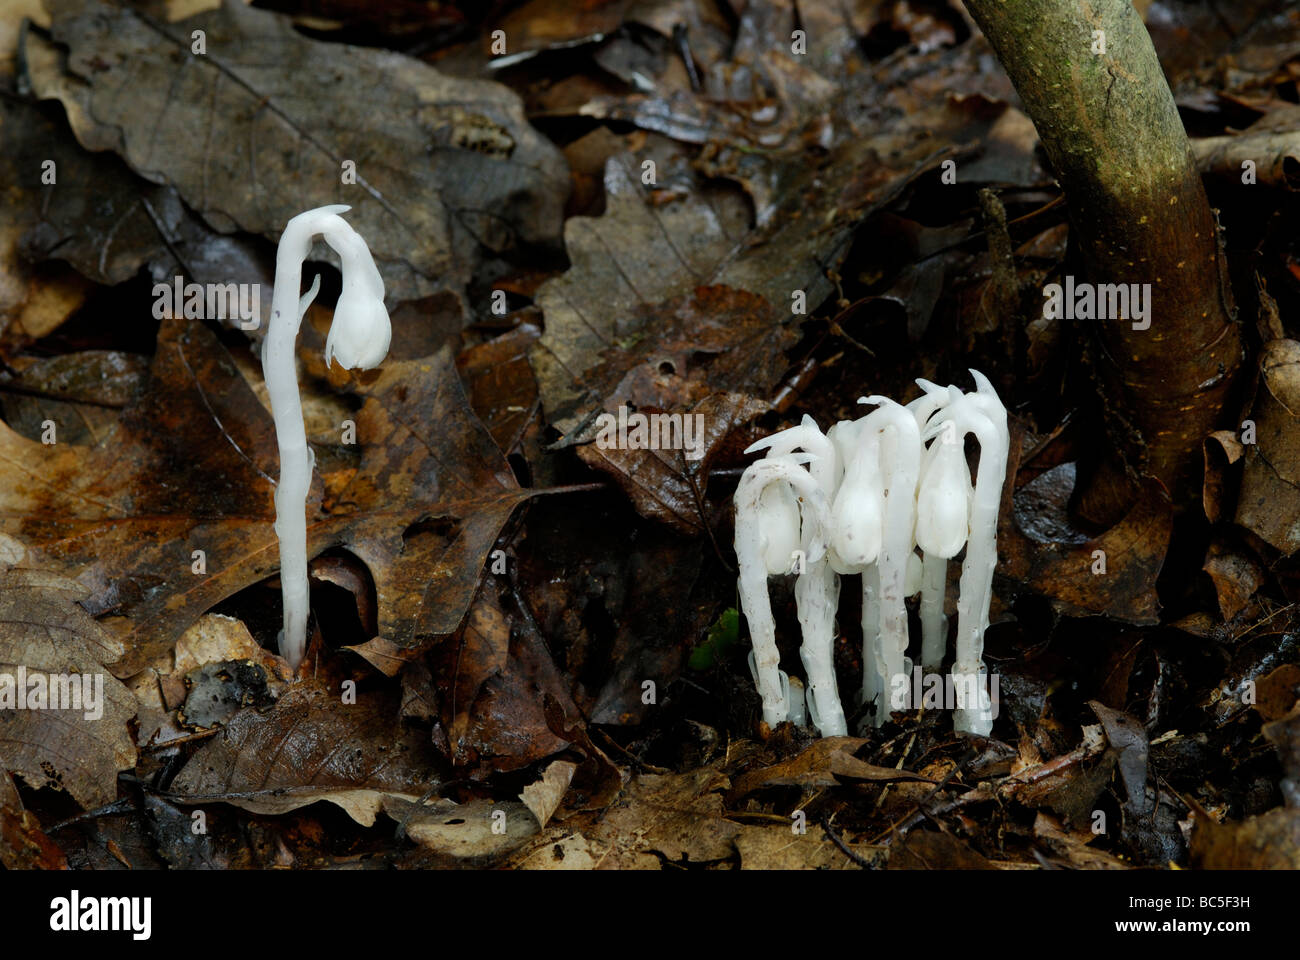 Indian pipe, Monotropa uniflora, an unusual non-photosynthetic, parasitic flowering plant. Stock Photo